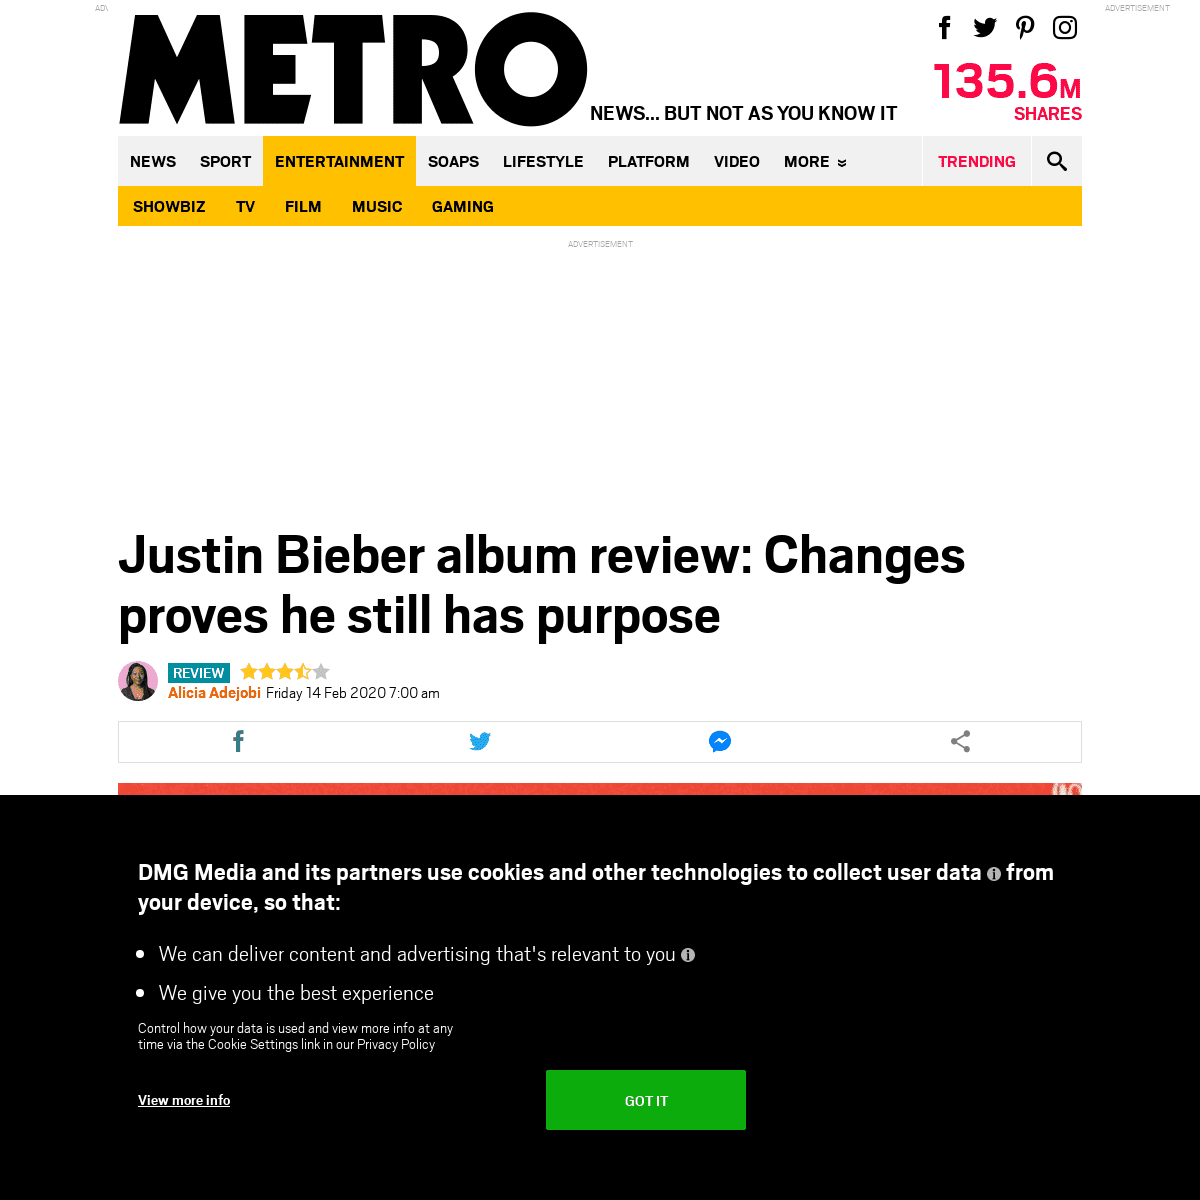 A complete backup of metro.co.uk/2020/02/14/justin-bieber-album-review-changes-proves-he-still-has-purpose-12236930/